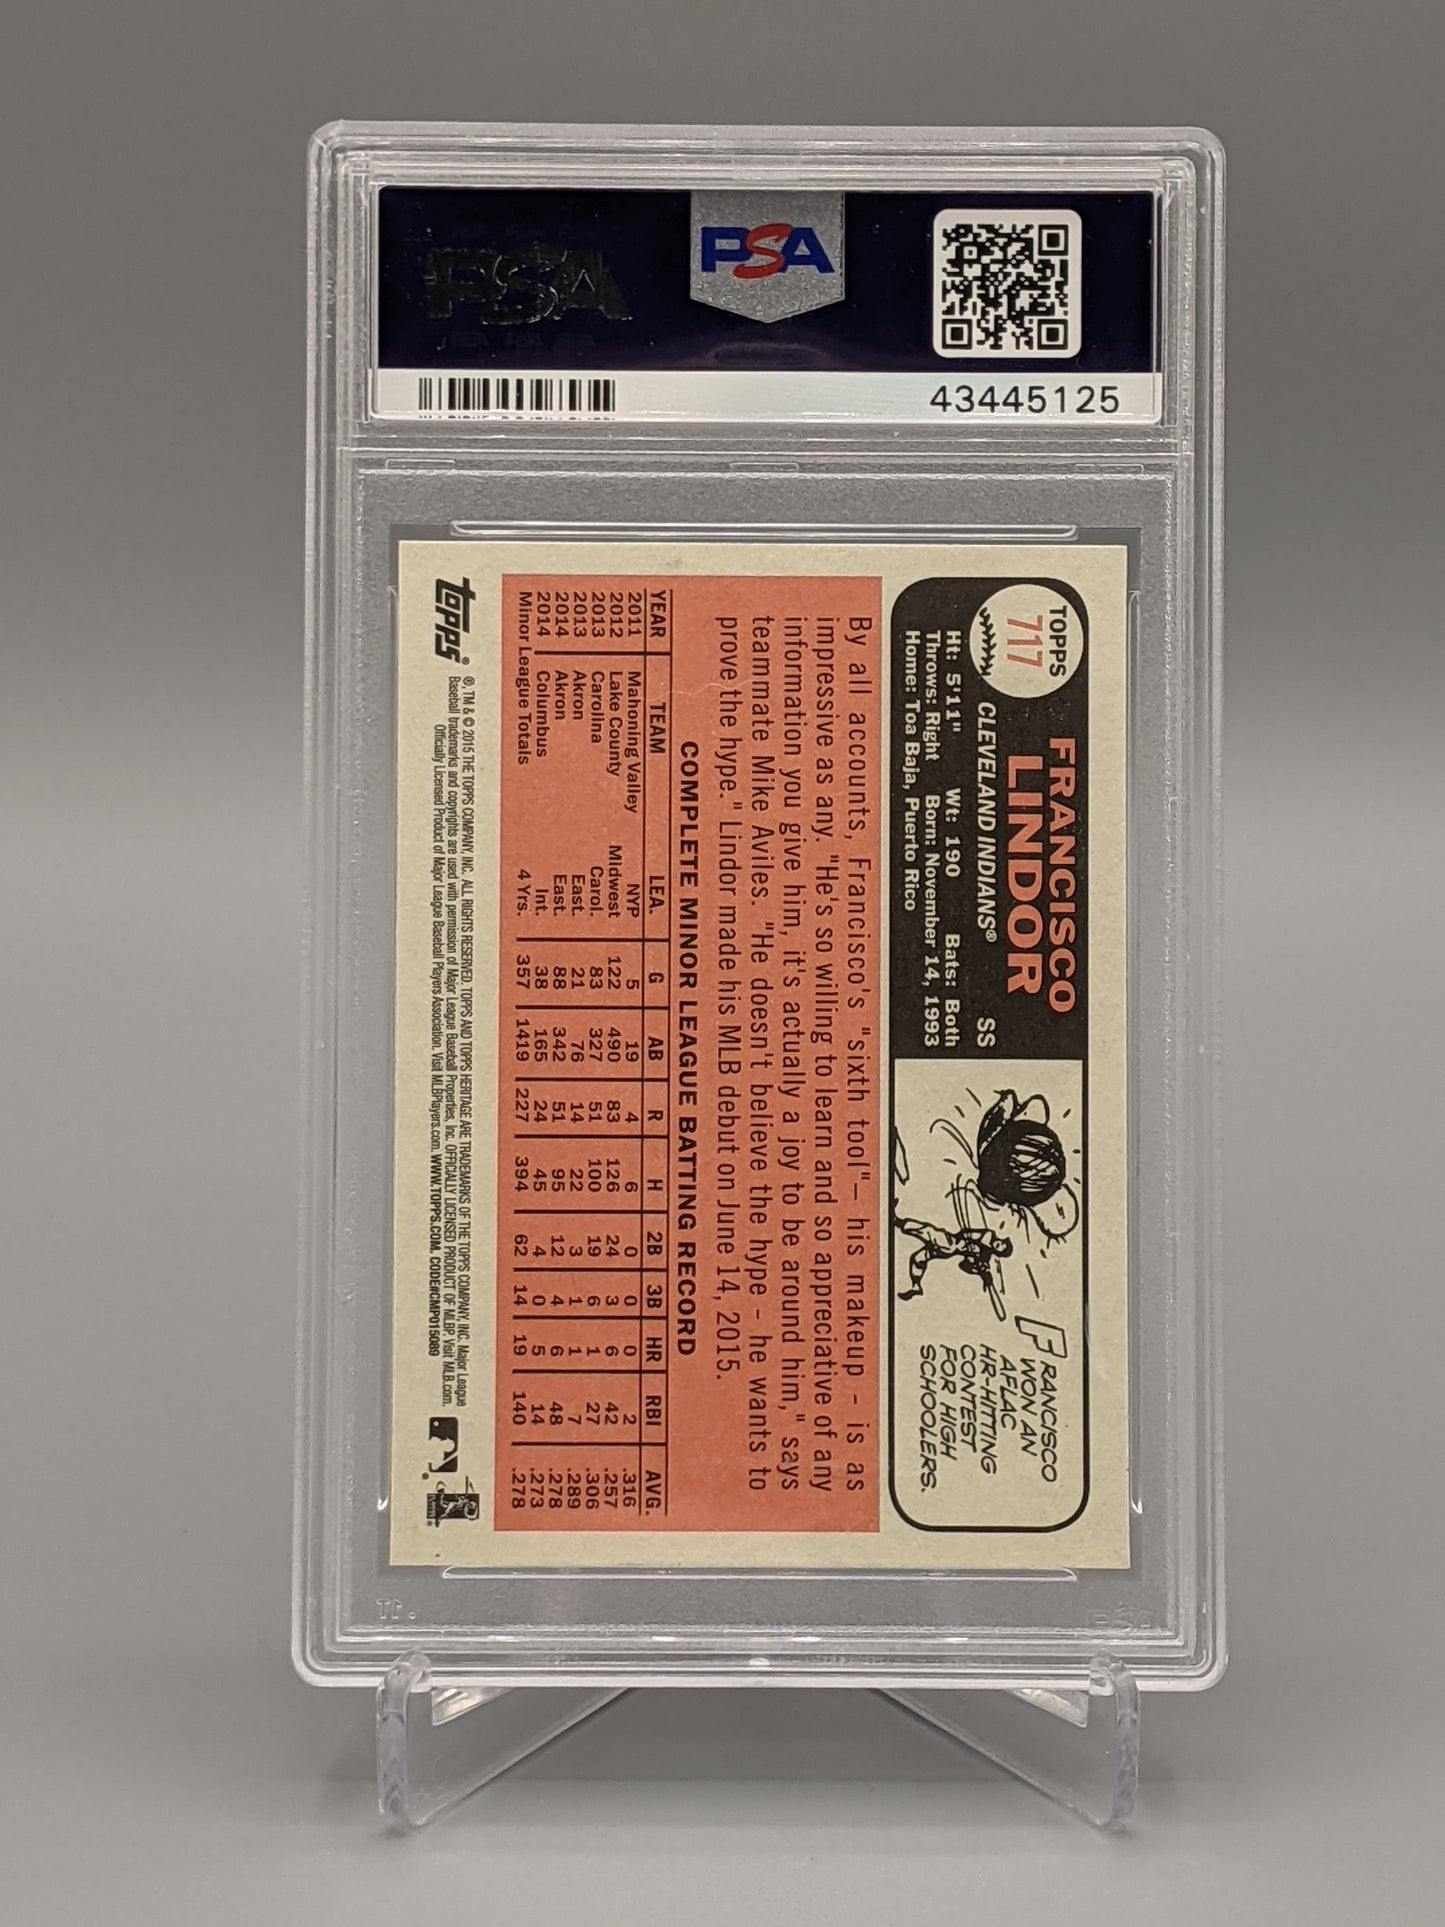 2015 Topps Heritage #717 Francisco Lindor RC White Jersey PSA 10 Indians